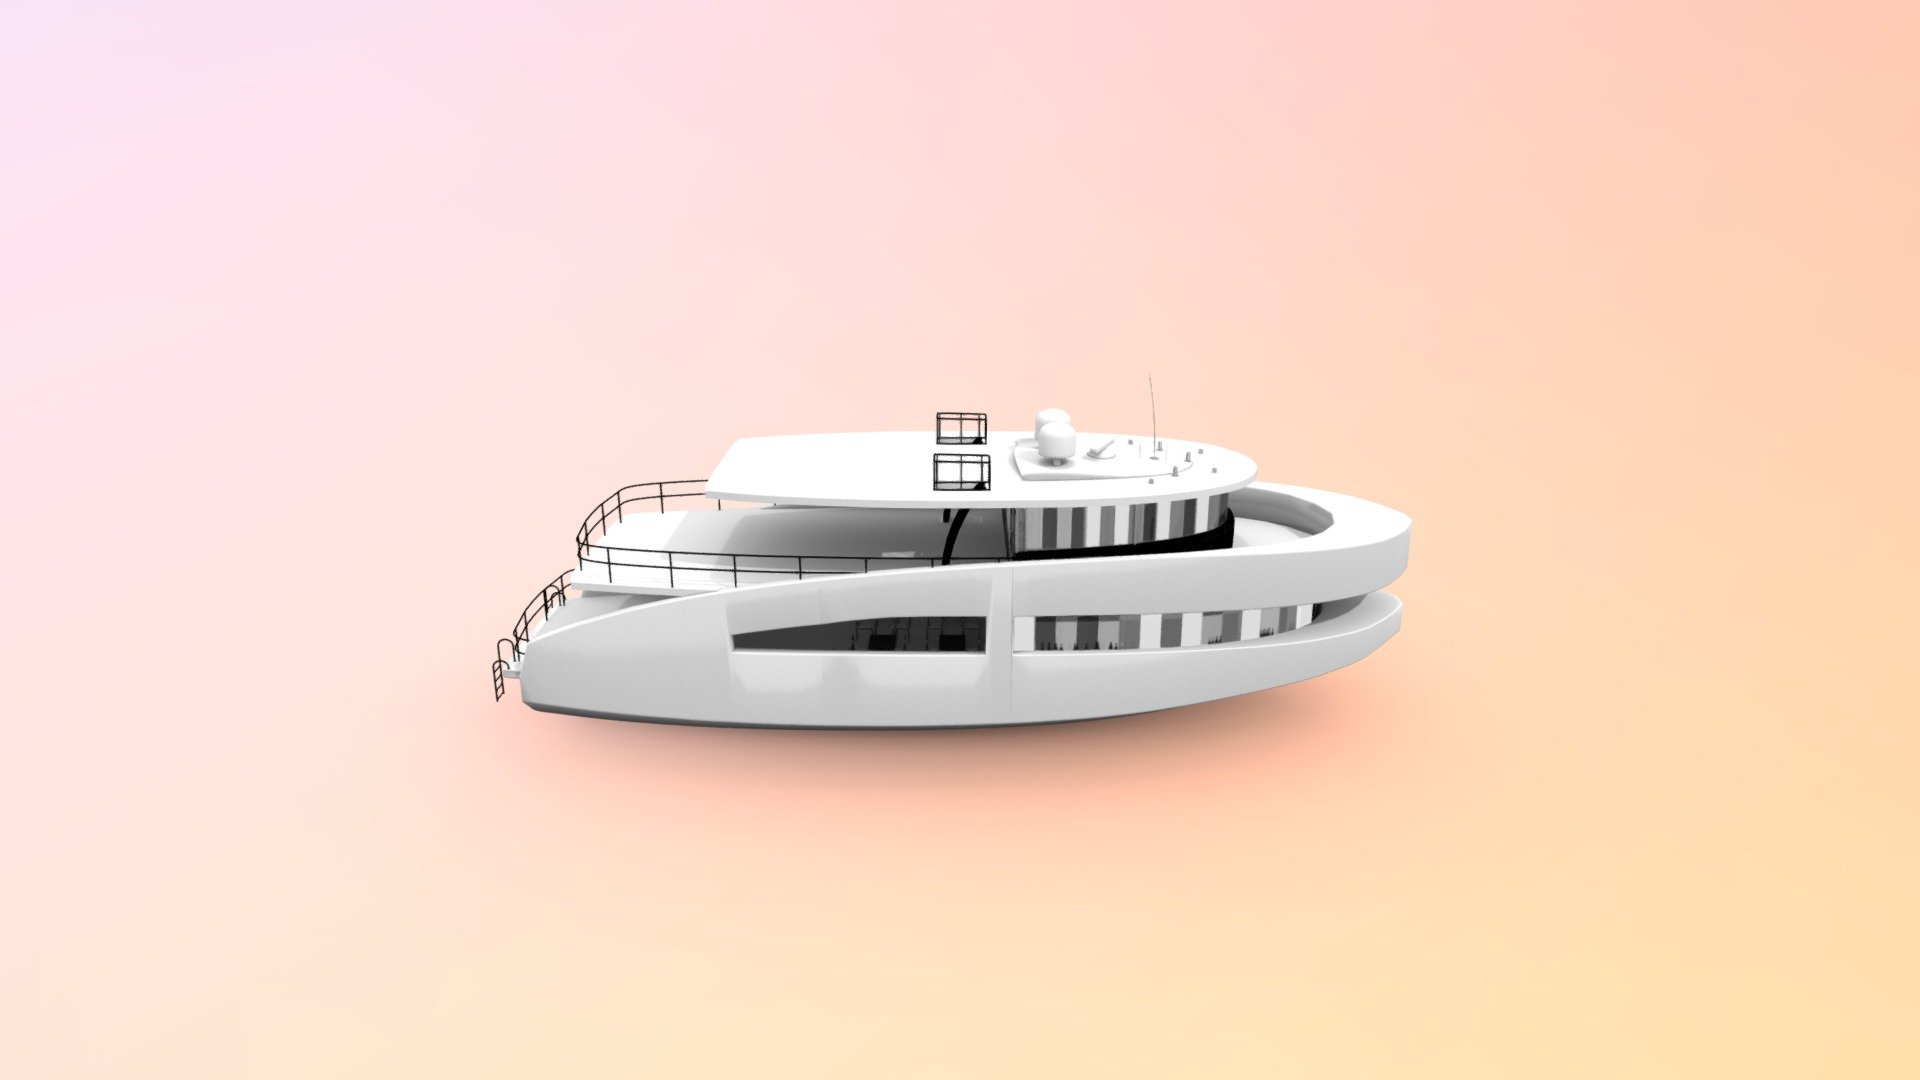 Designed for Amsterdam Yachts by A.W. Krechting - Miami - 3D model by ArnoldKrechting 3d model